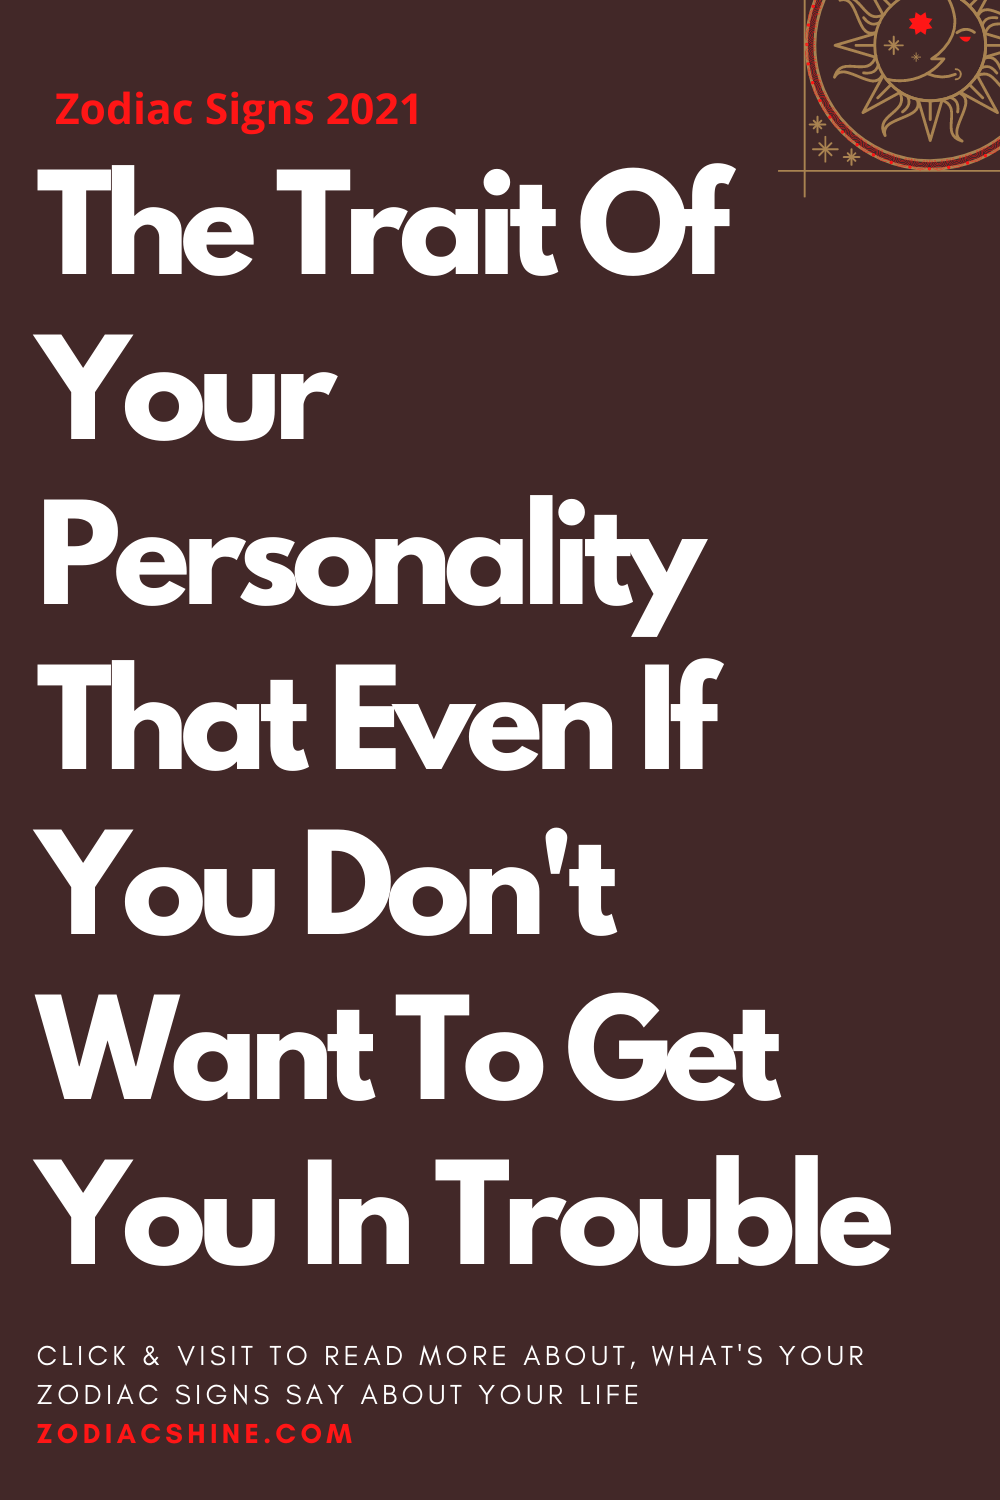 The Trait Of Your Personality That Even If You Don't Want To Get You In Trouble